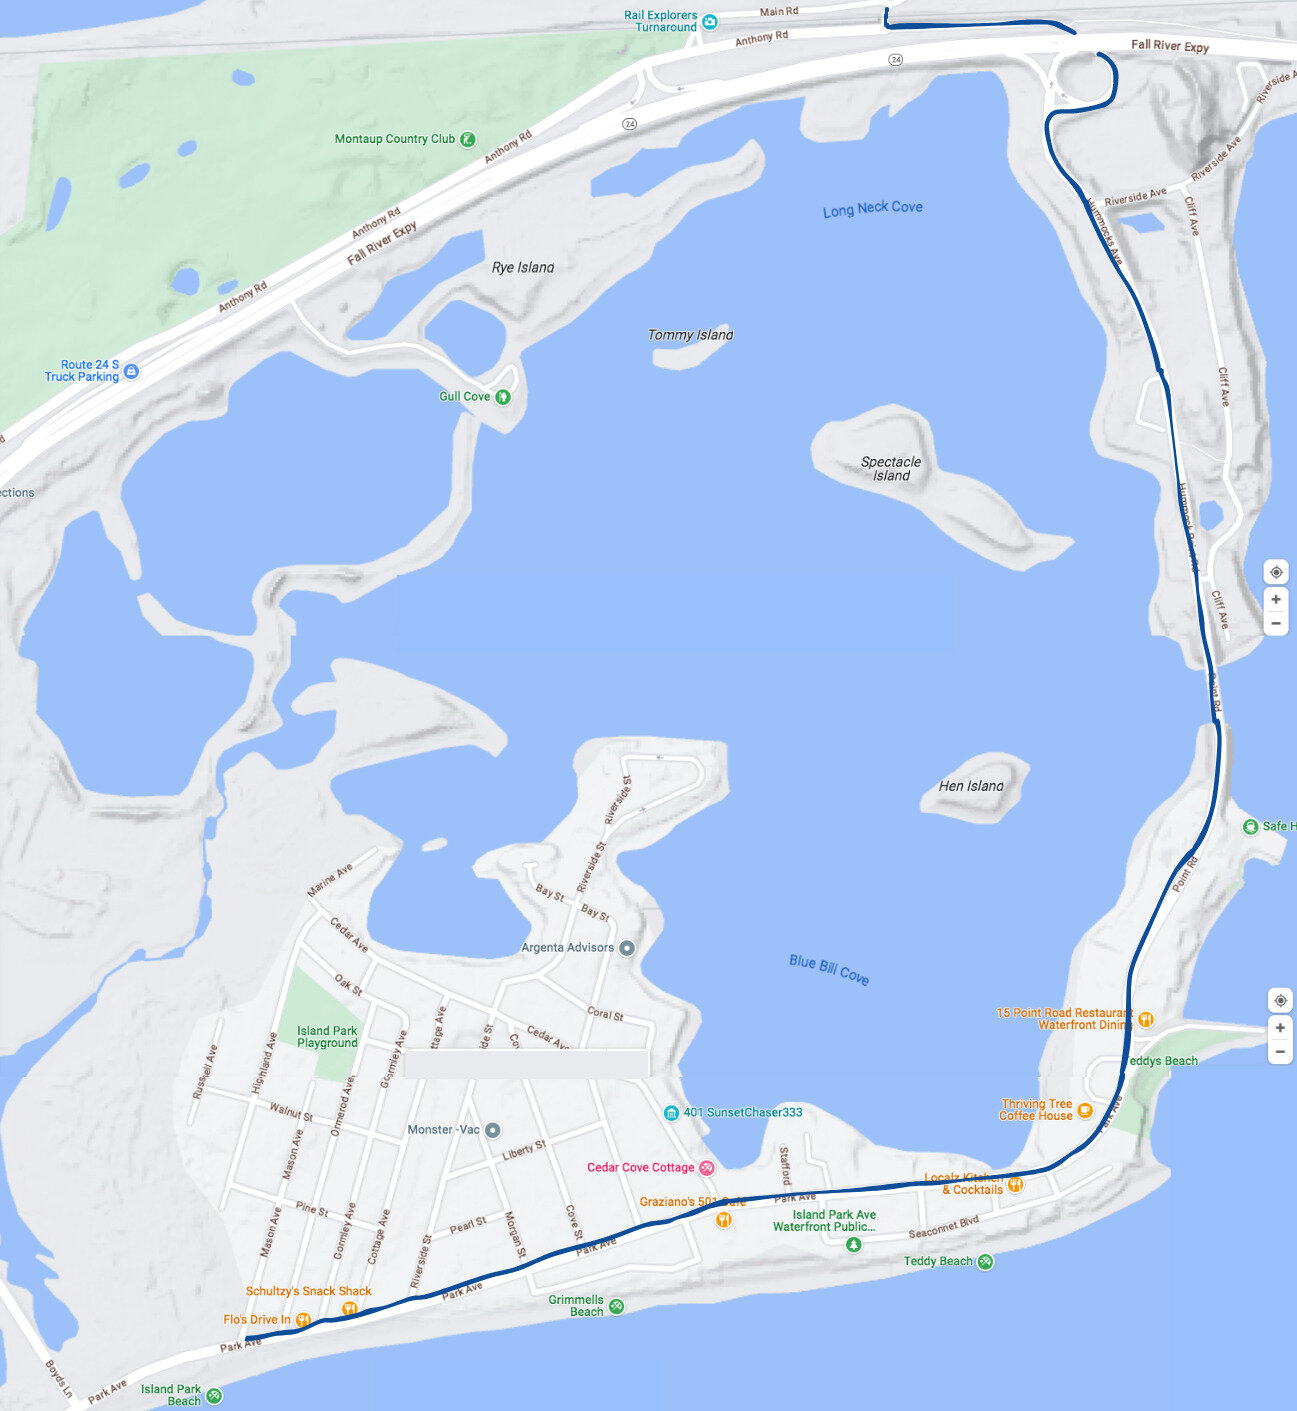 Blue line shows the route of The Sakonnet Coastal Bike and Stroll, which runs from 9 a.m. to noon on Saturday, Sept. 9.